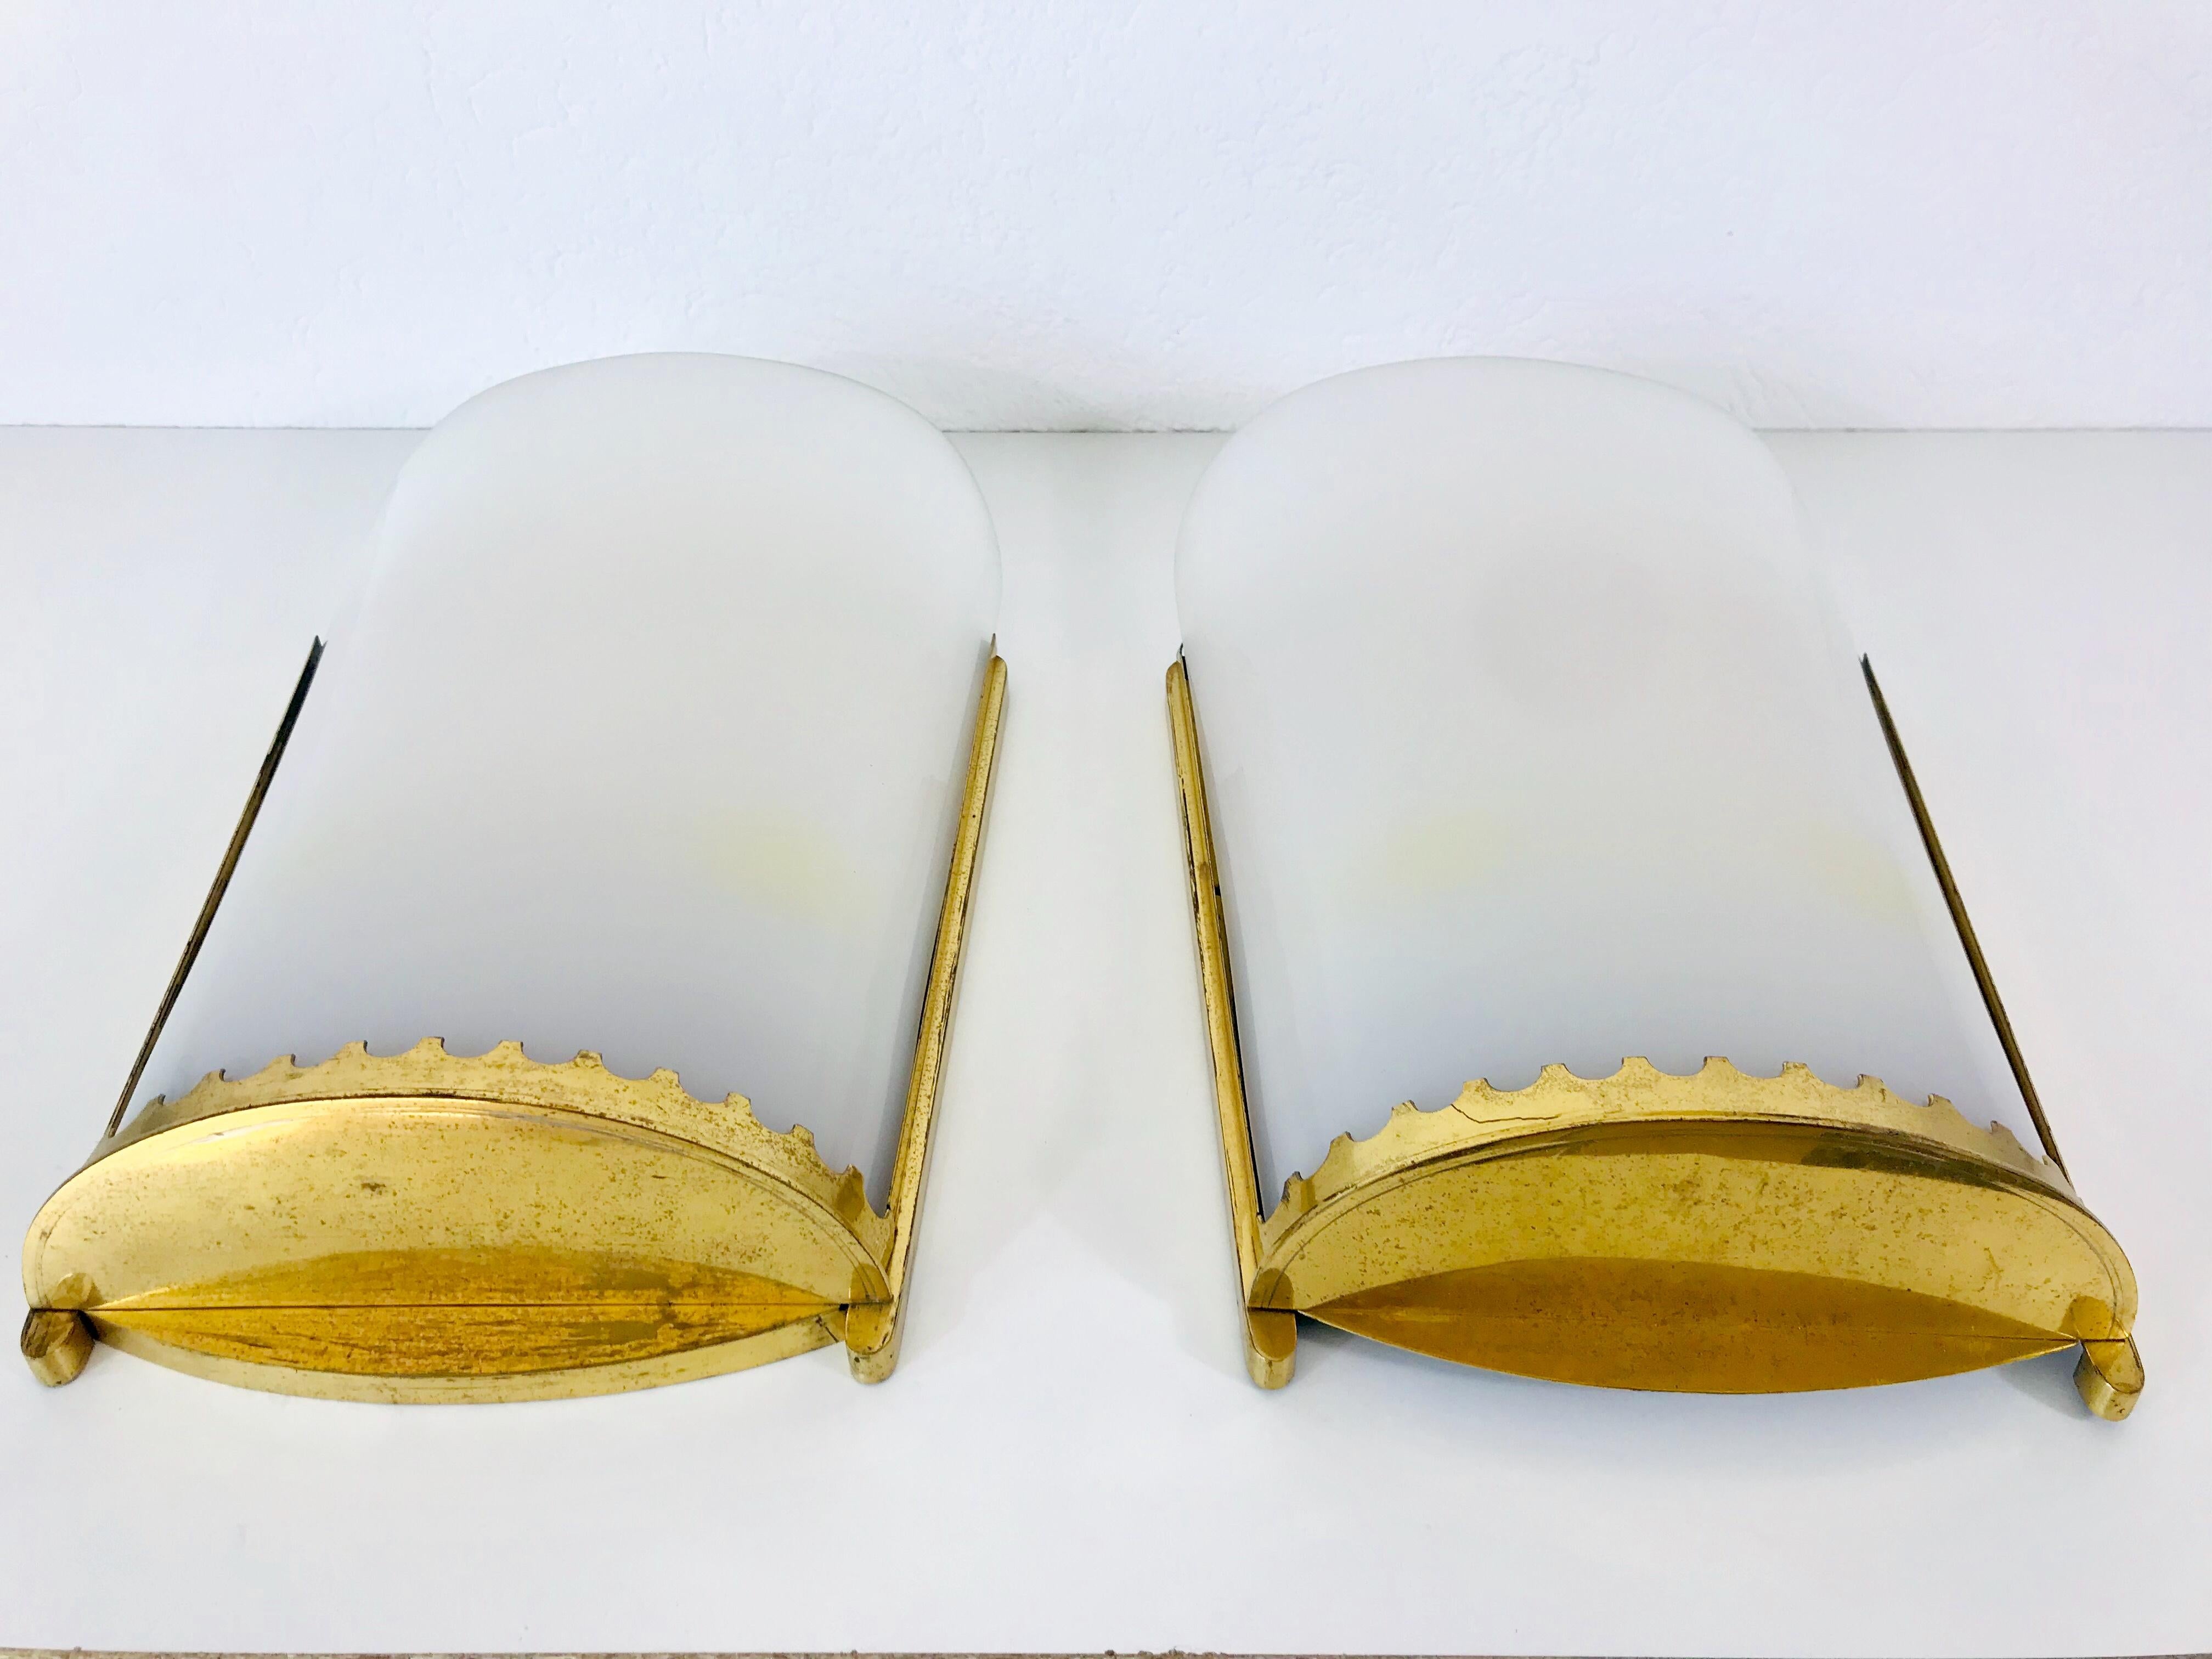 Huge Pair of Mid-Century Modern Brass and Perspex Cinema Wall Lamps, 1950s In Good Condition For Sale In Hagenbach, DE